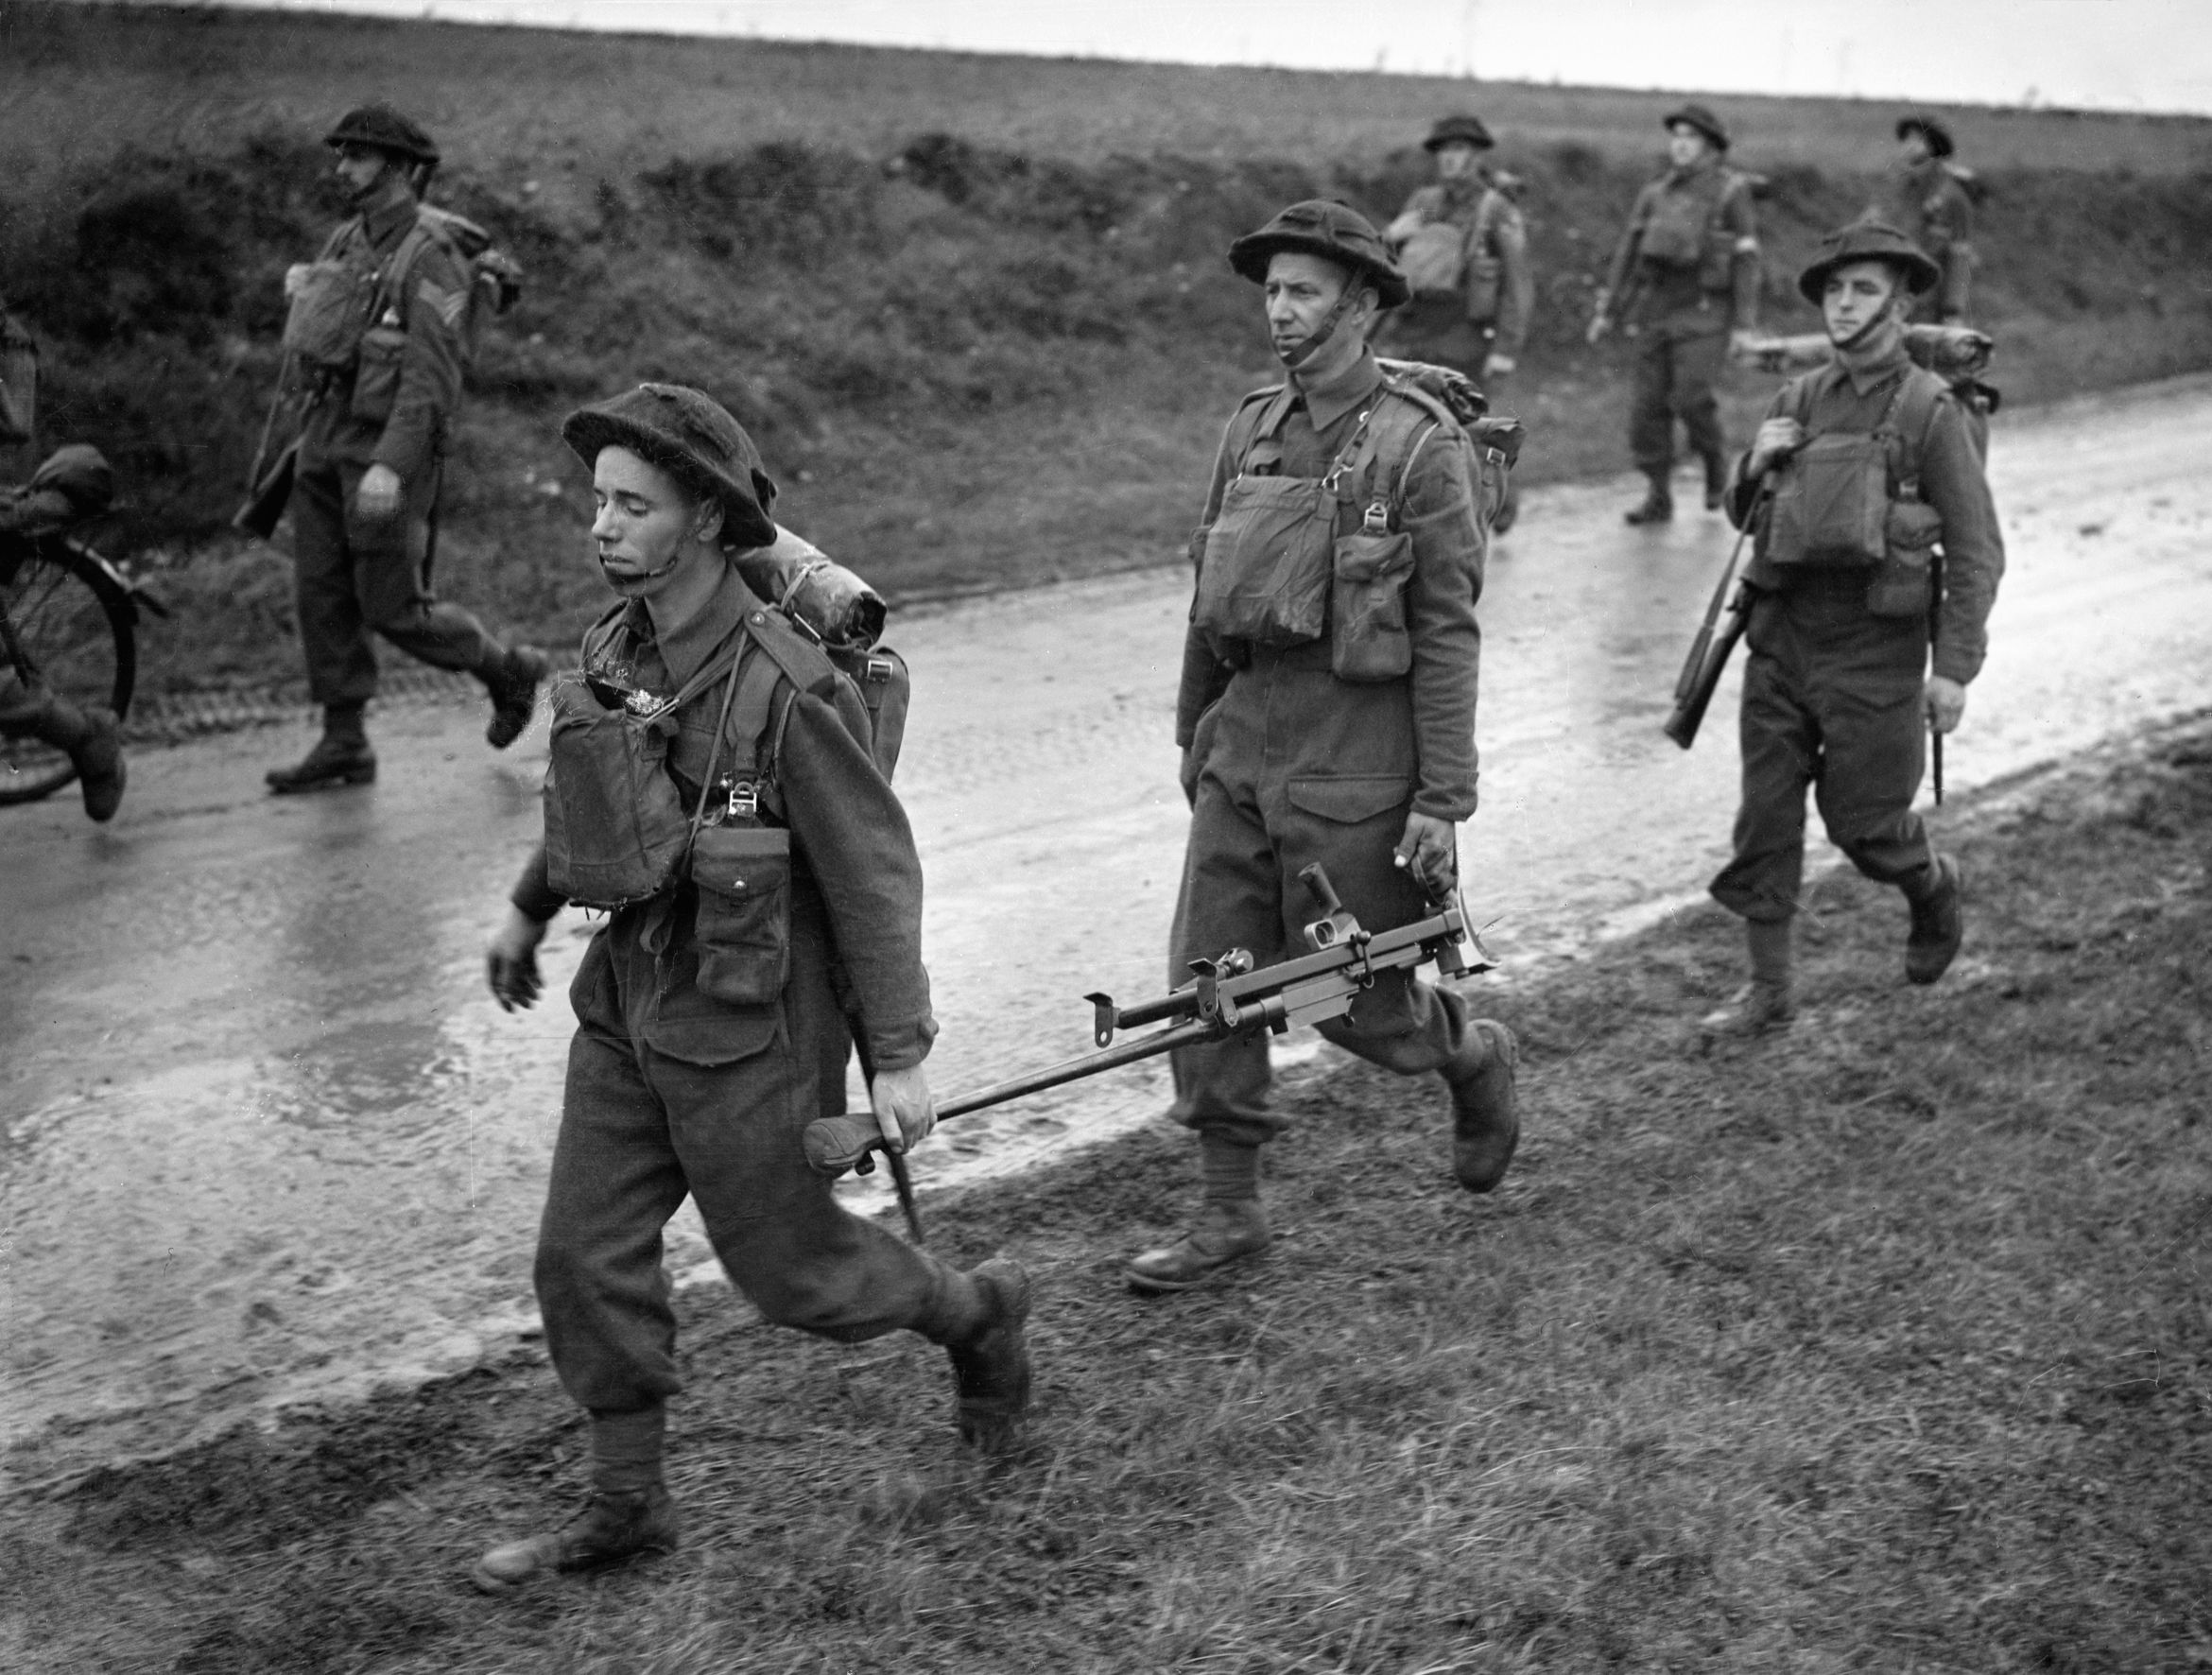 Men of the Royal Irish Fusiliers trudge down a road near the French town of Arras in October 1940.  Two of the soldiers, in the foreground, share the burden of a Boys antitank rifle.